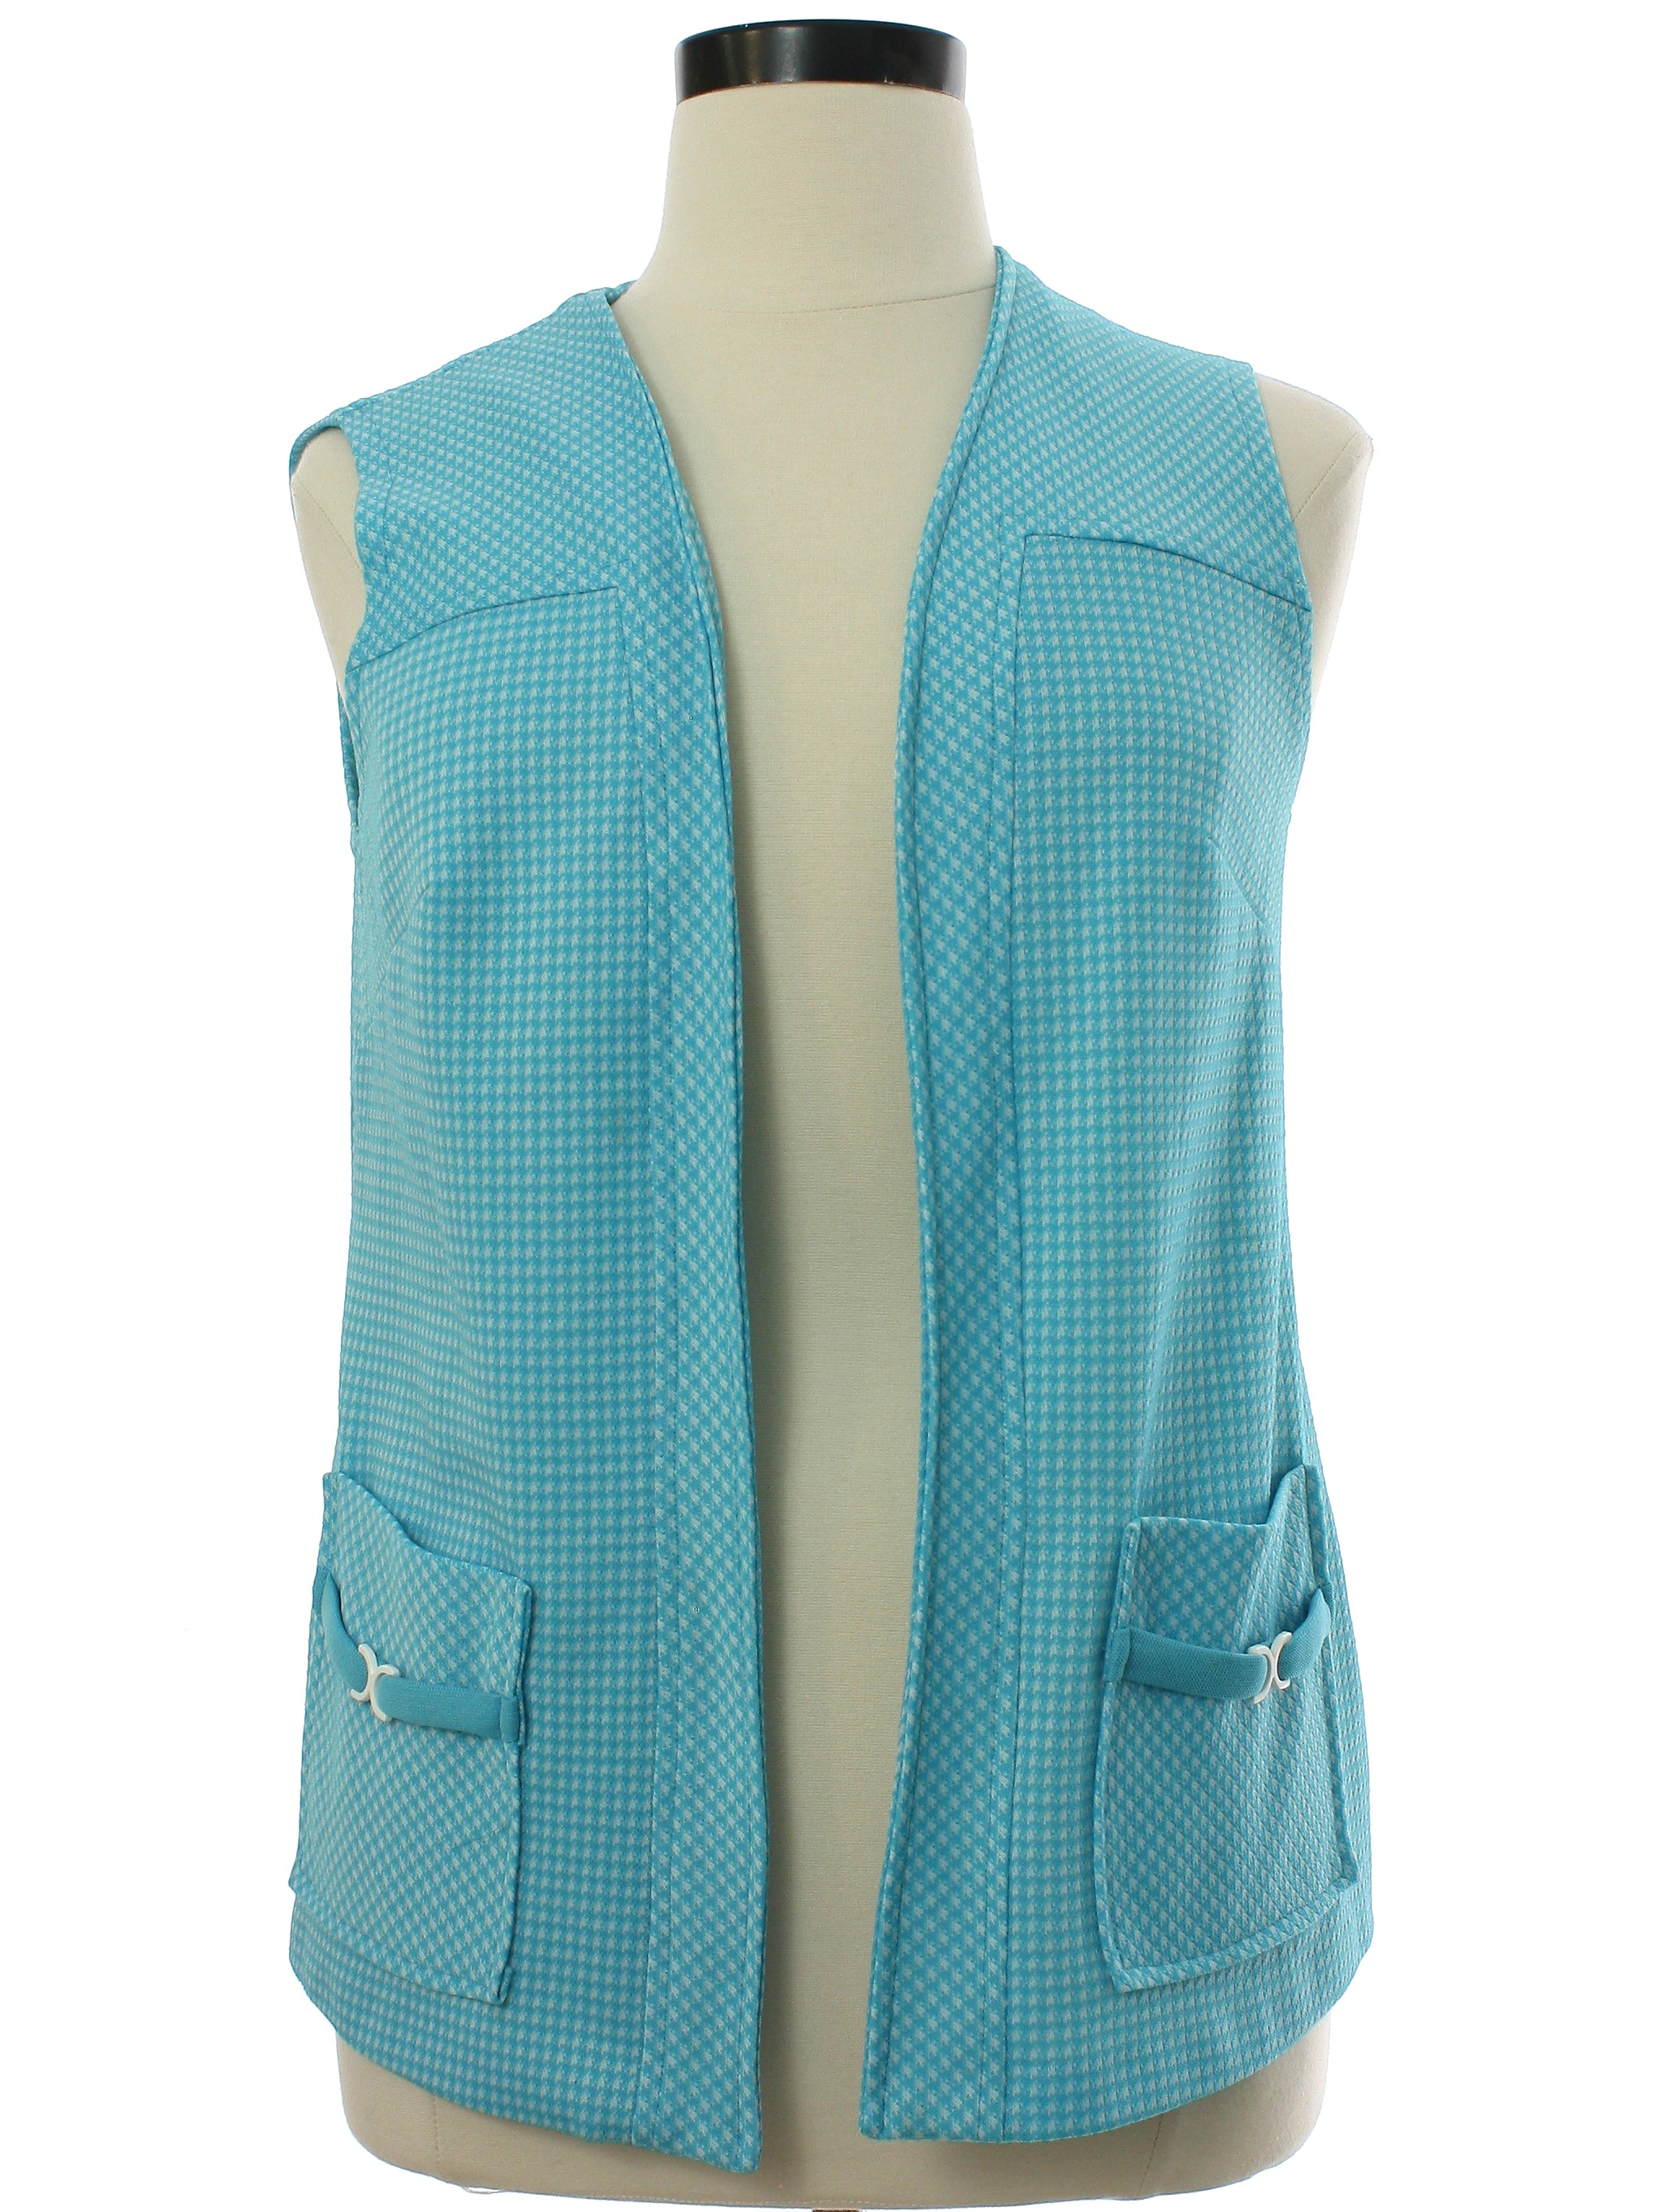 1970's Retro Vest: 70s -Care Label- Womens turquoise and white ...